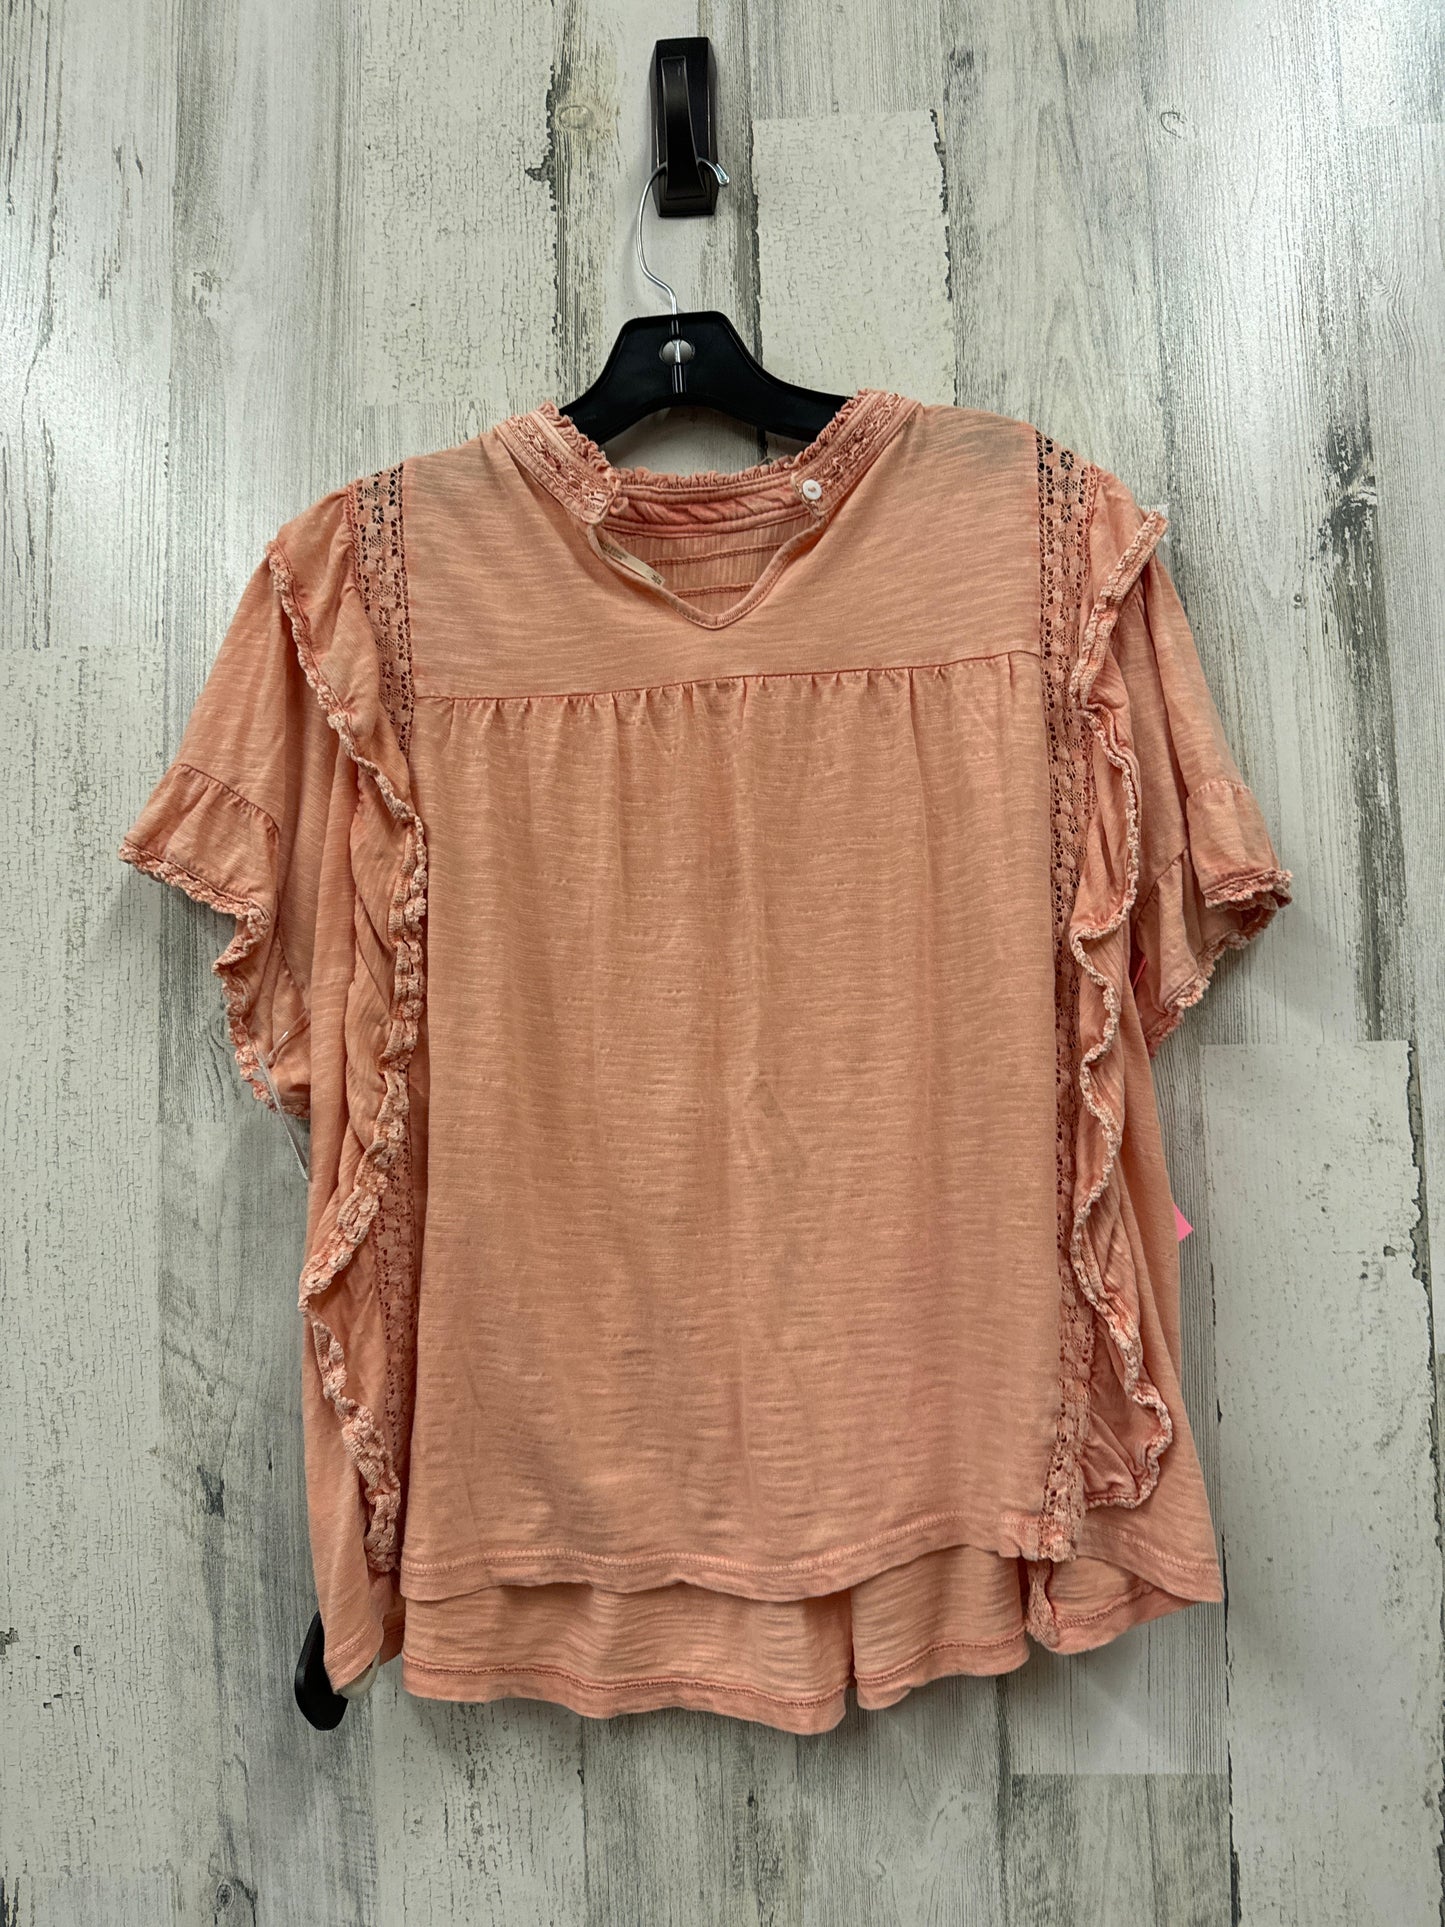 Peach Top Short Sleeve Free People, Size M